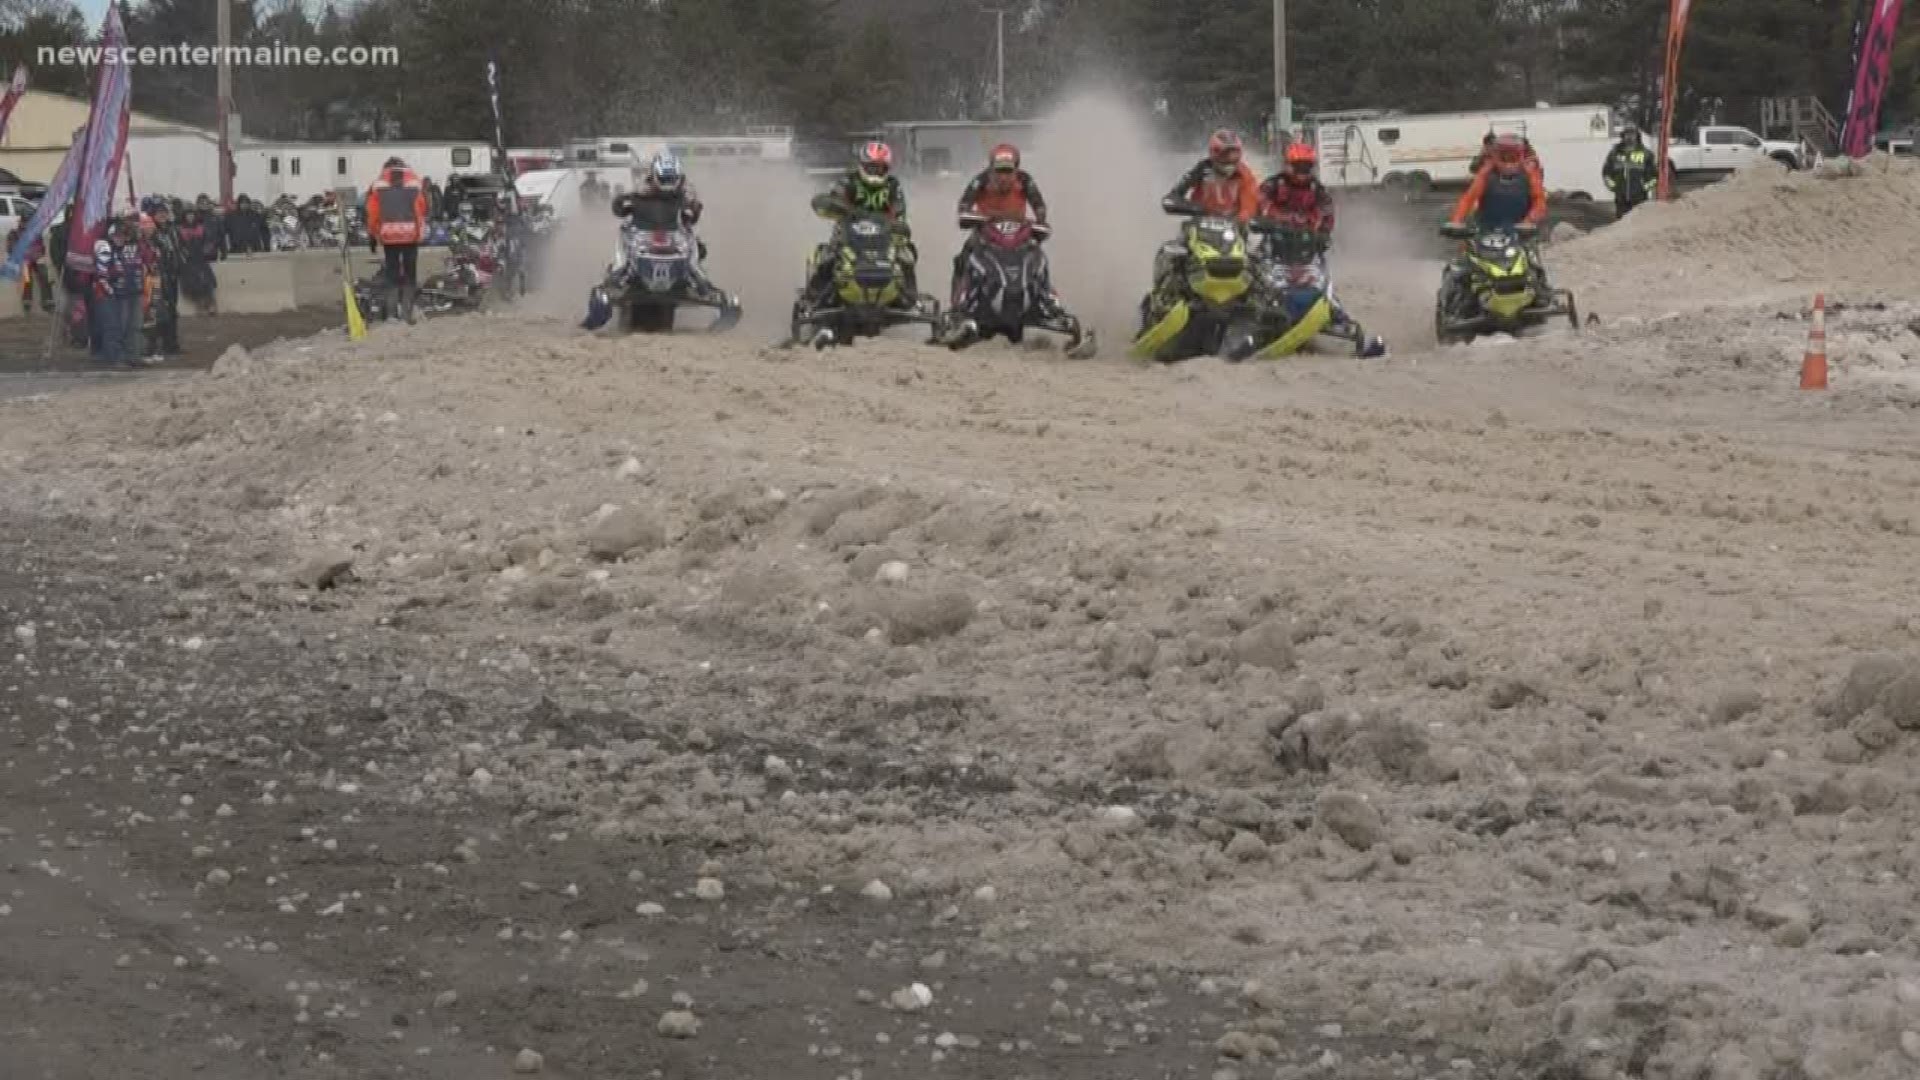 For the past five years Snocross racing has come to Bangor full of speed and racing. Despite coronavirus concerns, the event continued for being an outdoor event.